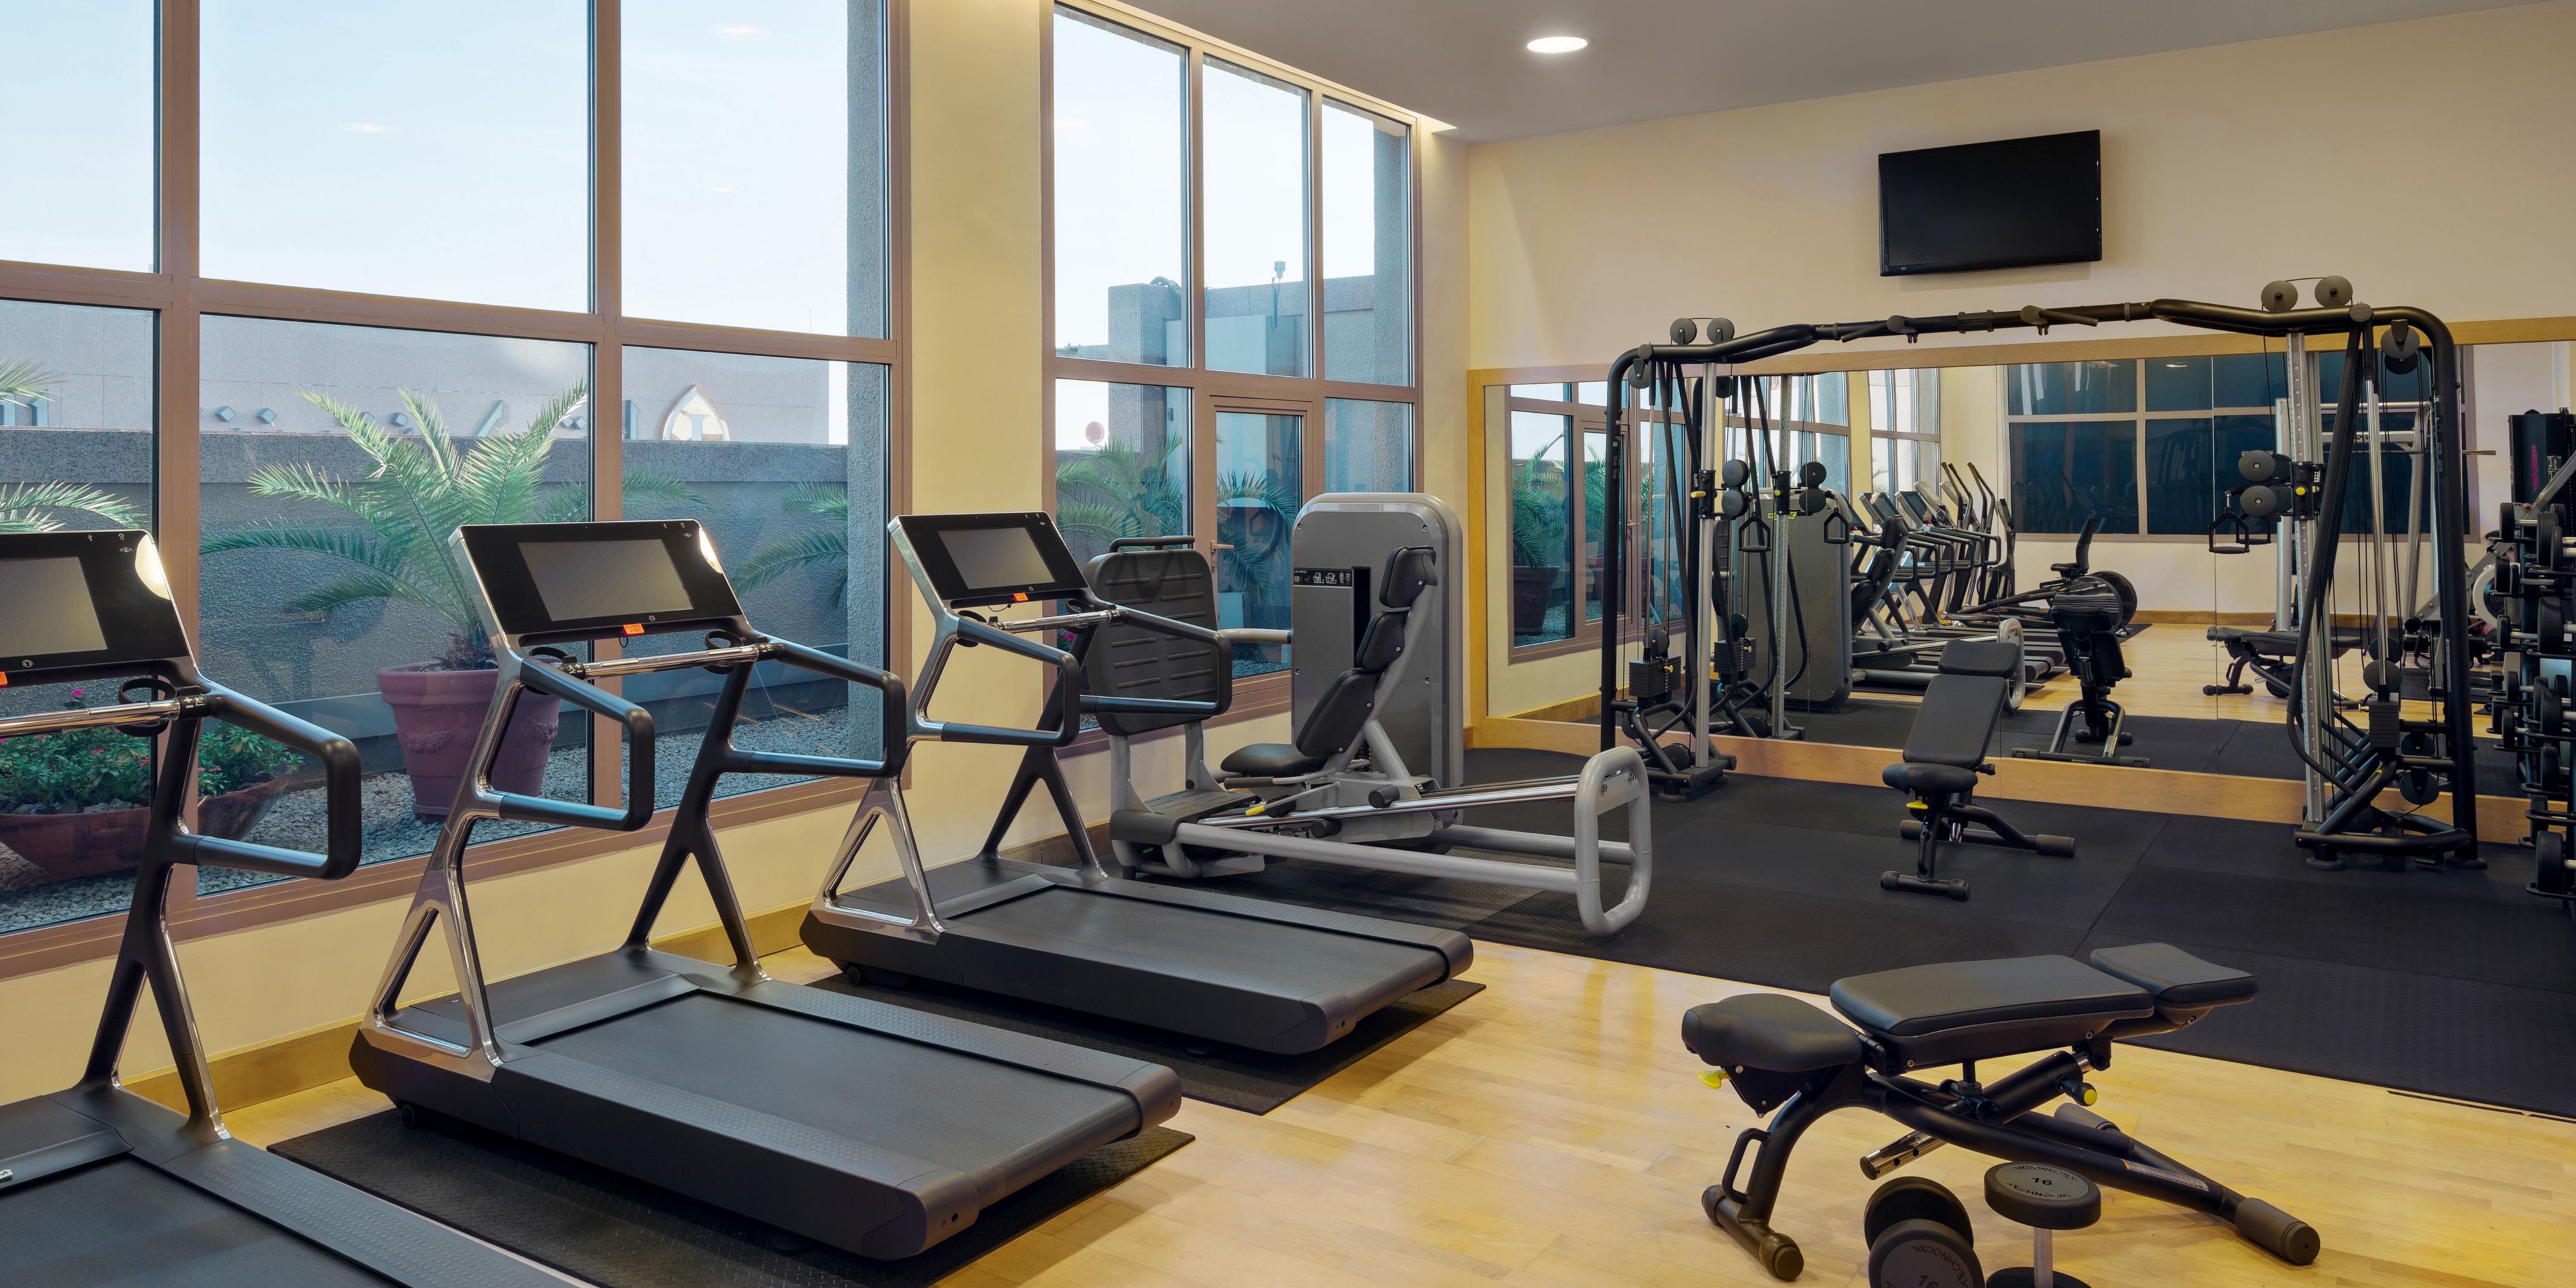 Keep your healthy lifestyle even when traveling for work and step up your fitness regime with our upgraded wellness facility, which features a fully-equipped Fitness Center. Highly qualified personal trainers and spa therapists aim to provide you with a holistic experience during your stay. Now open in both towers.